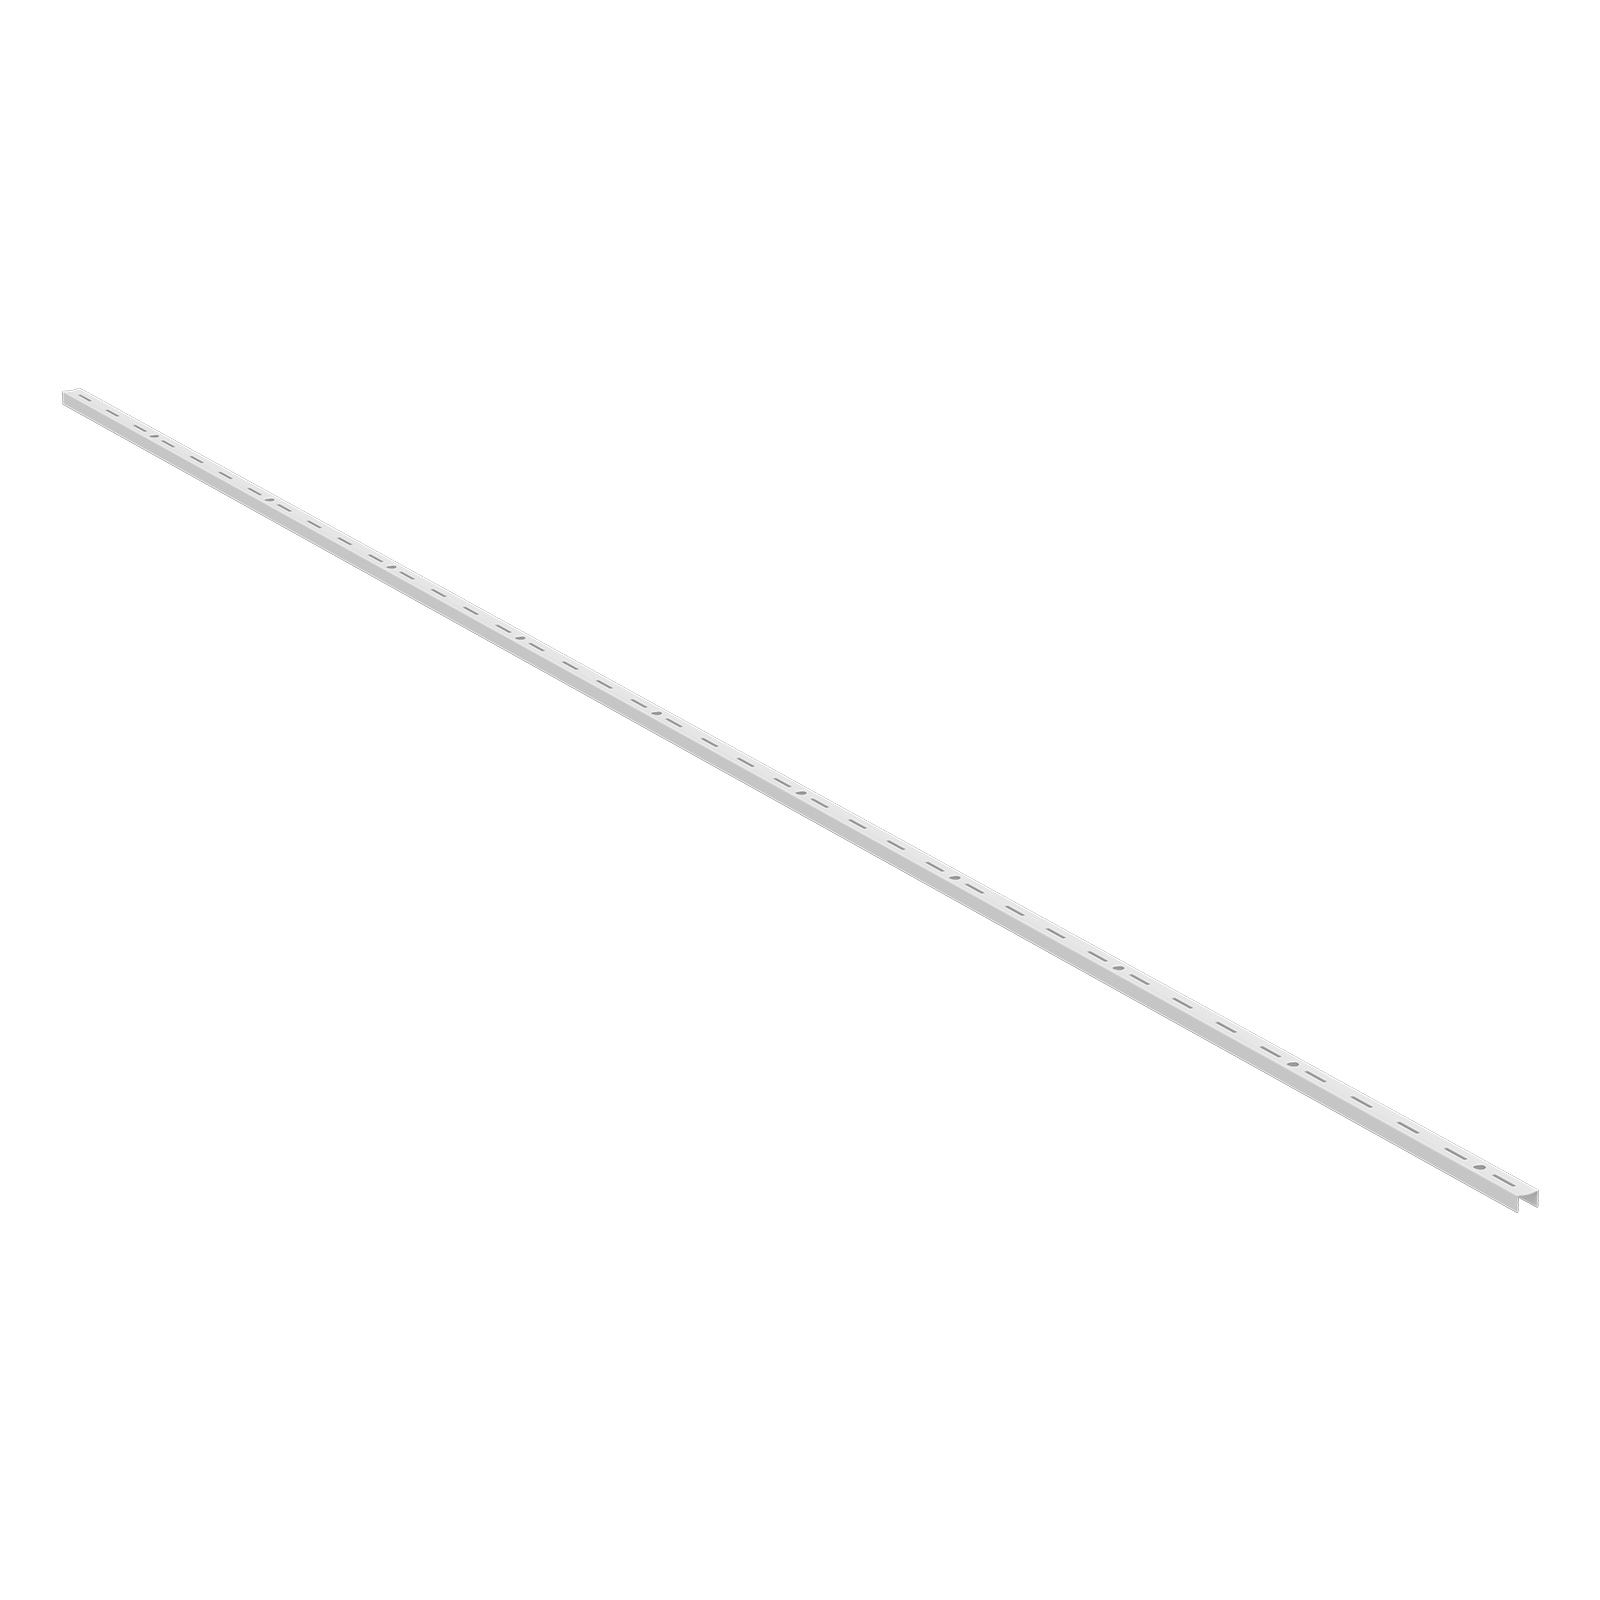 Home Solutions Single Slot Wall Strip White 2000mm